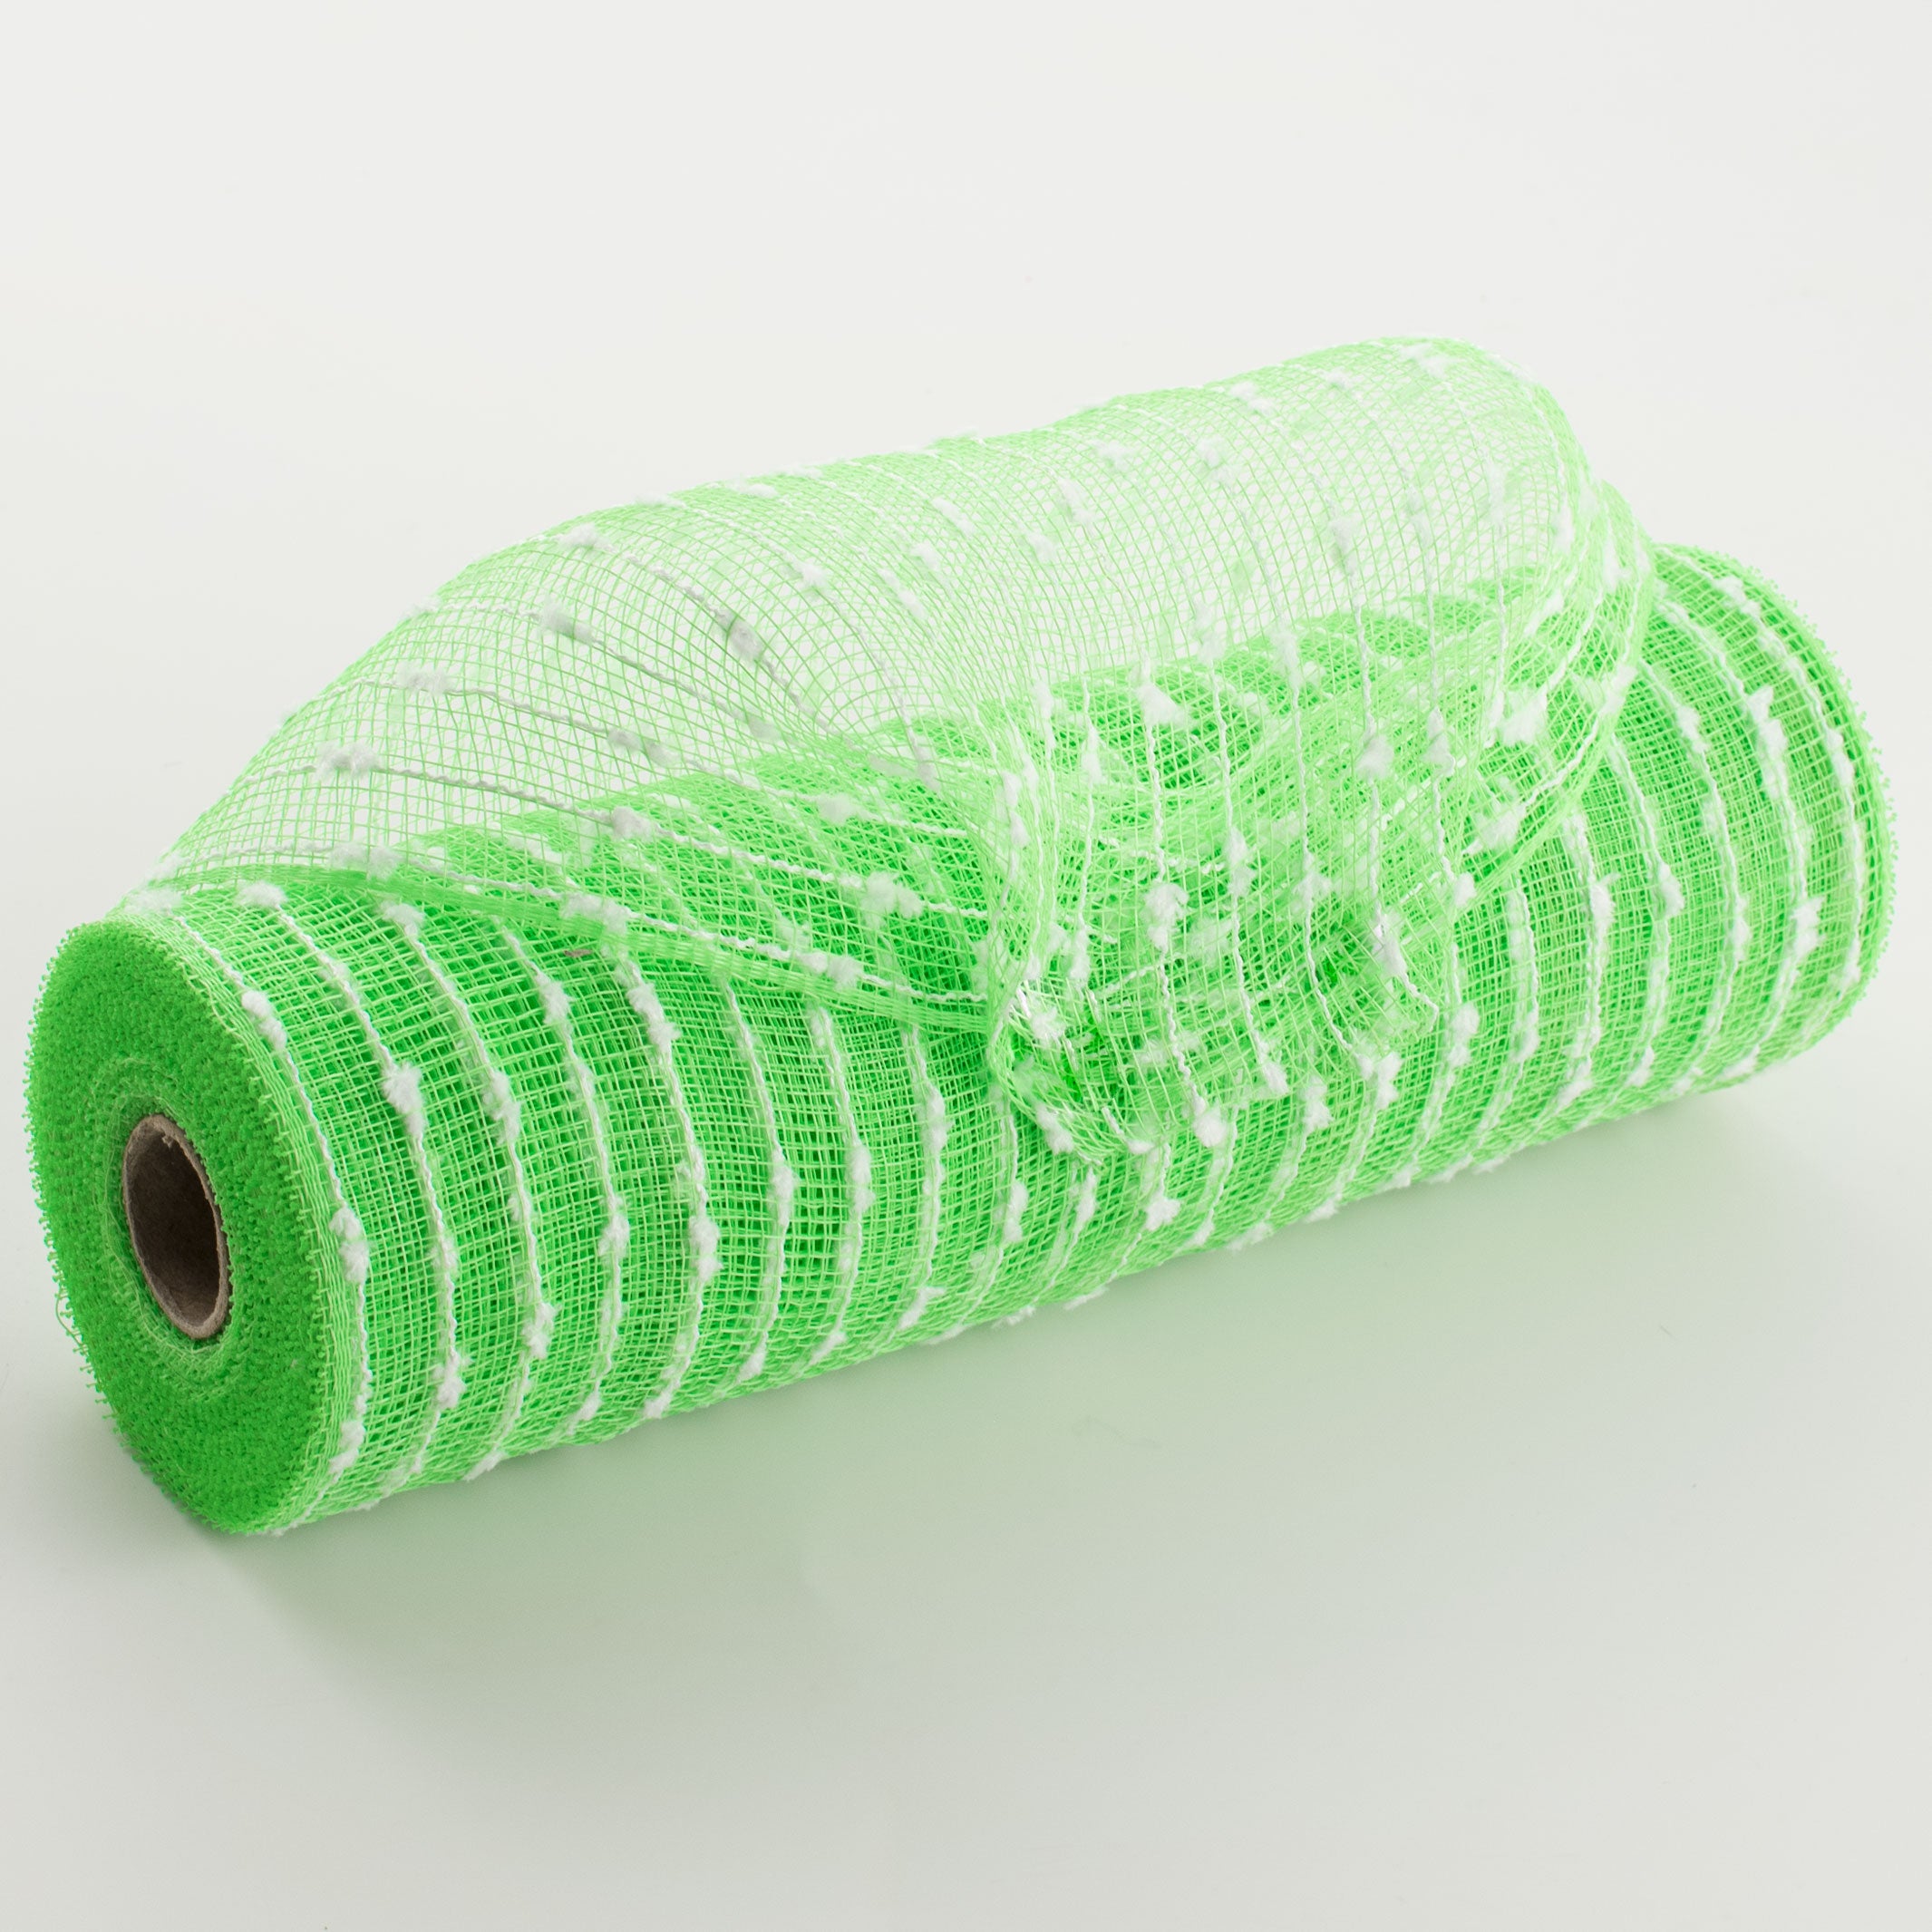 10" Snowball Deco Mesh: Lime Green & White (10 Yards)